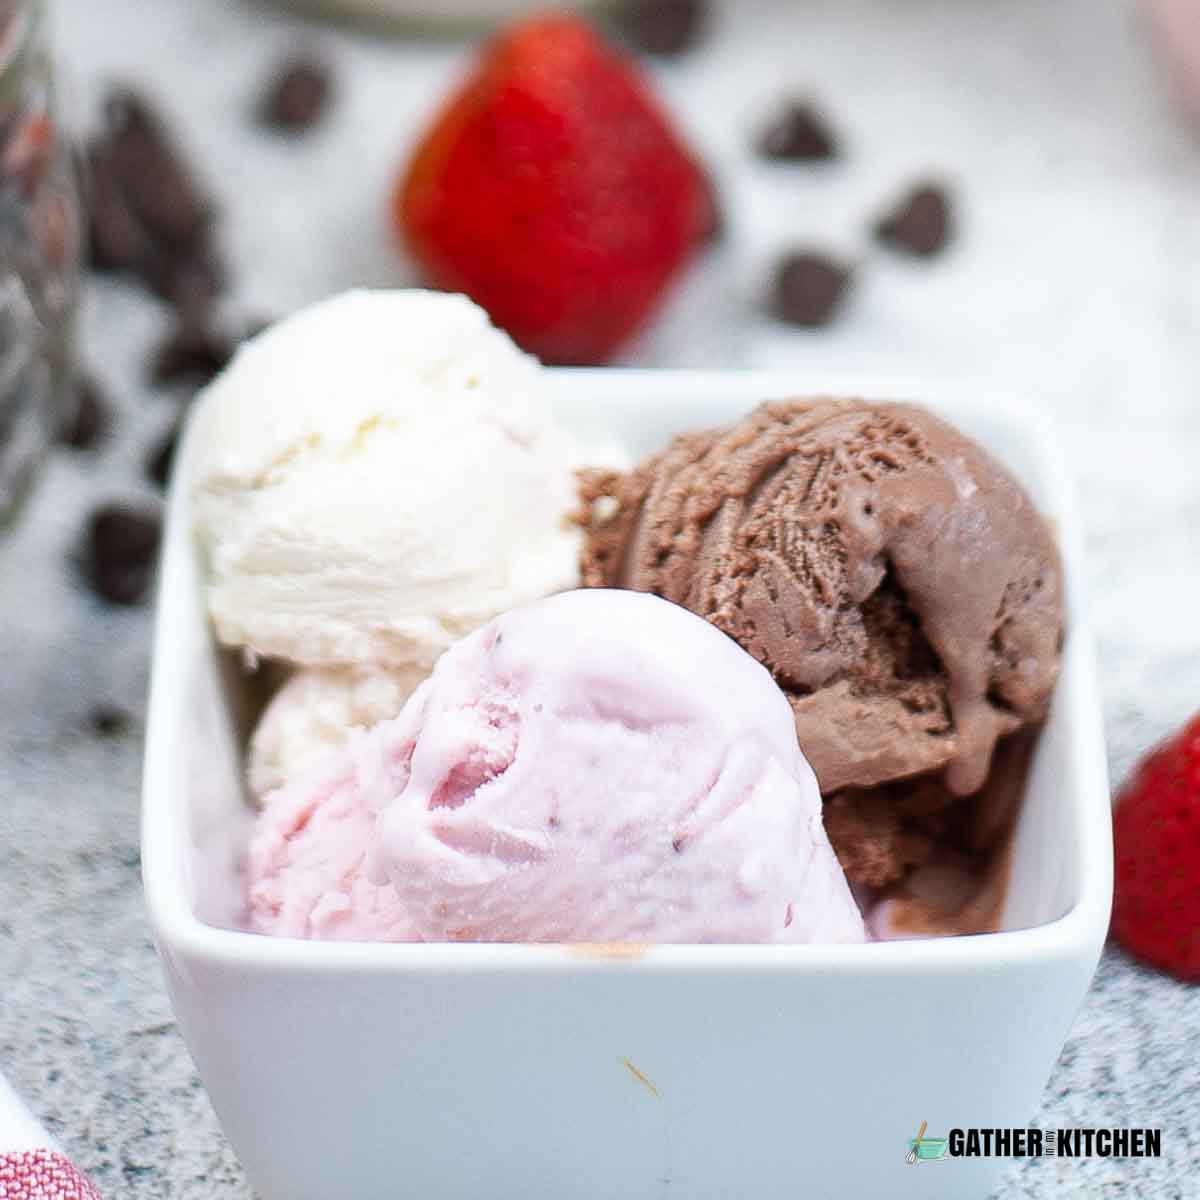 A scoop of vanilla, strawberry, and chocolate ice cream in a small bowl.